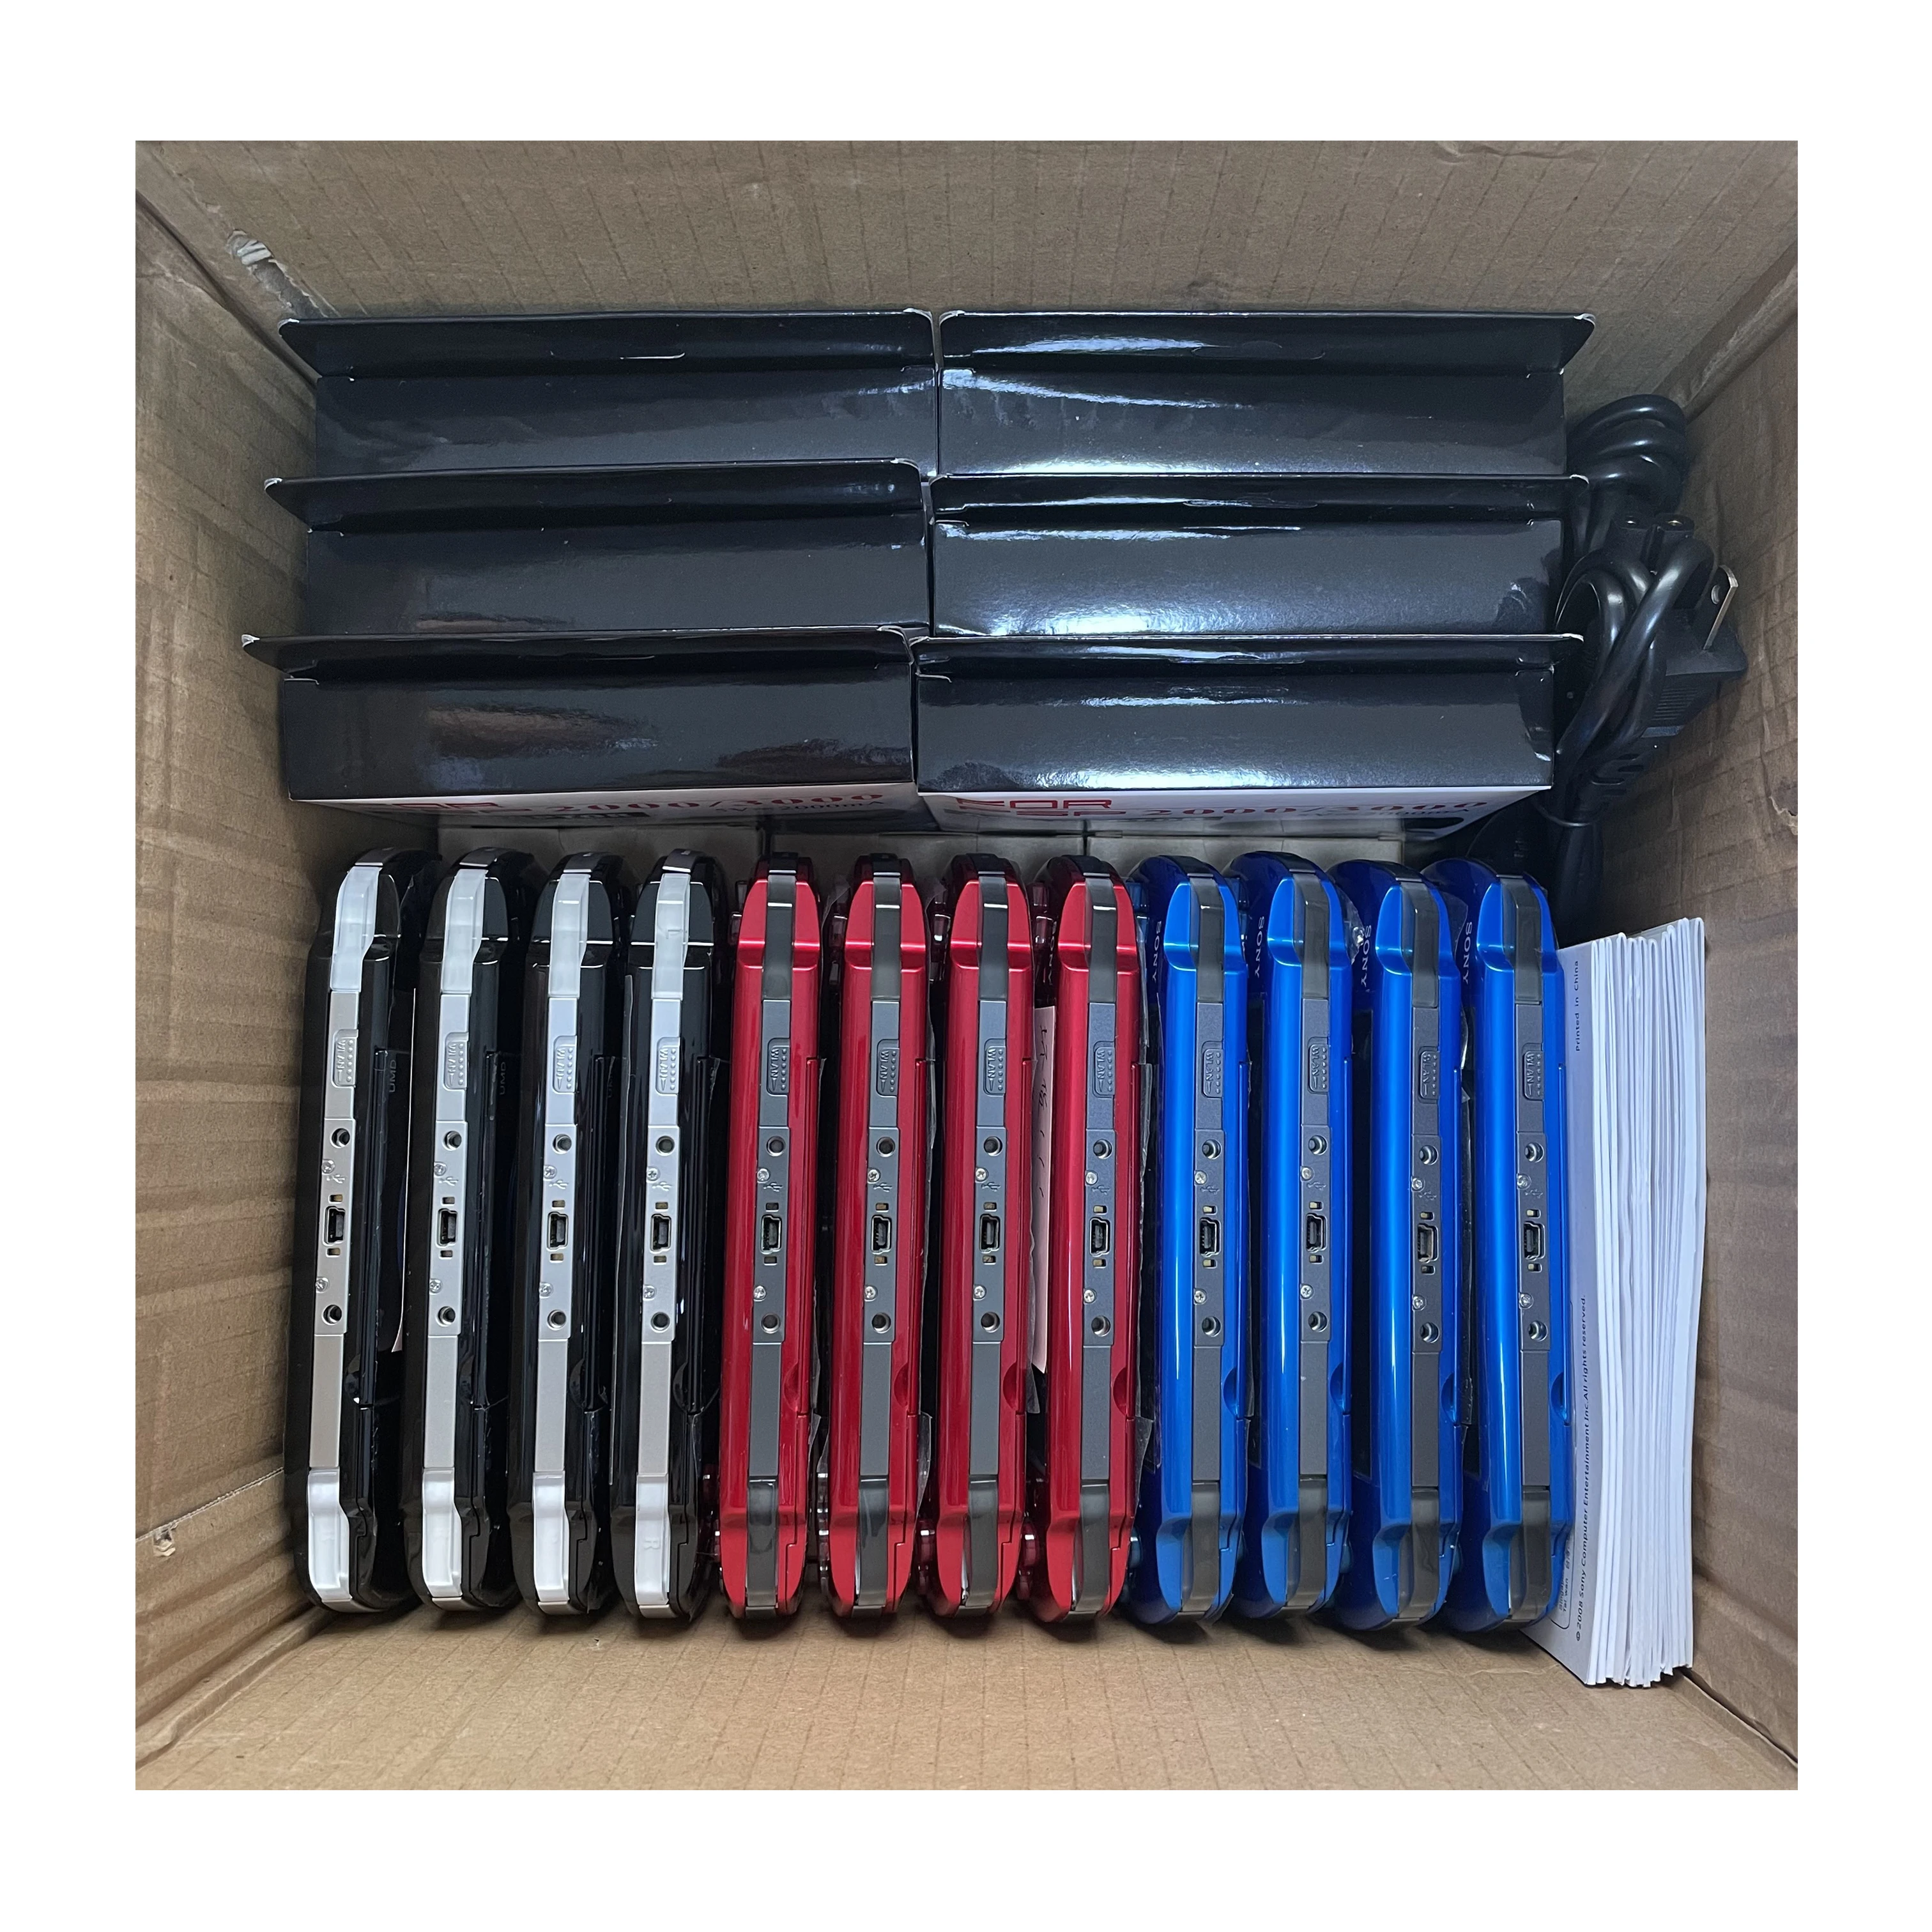 

Free Shipping 45 pcs By DHL!!! For PSP 3000 Handheld Game Player Classic Game Console ( Original And Refurbished ), Black,red,white,blue